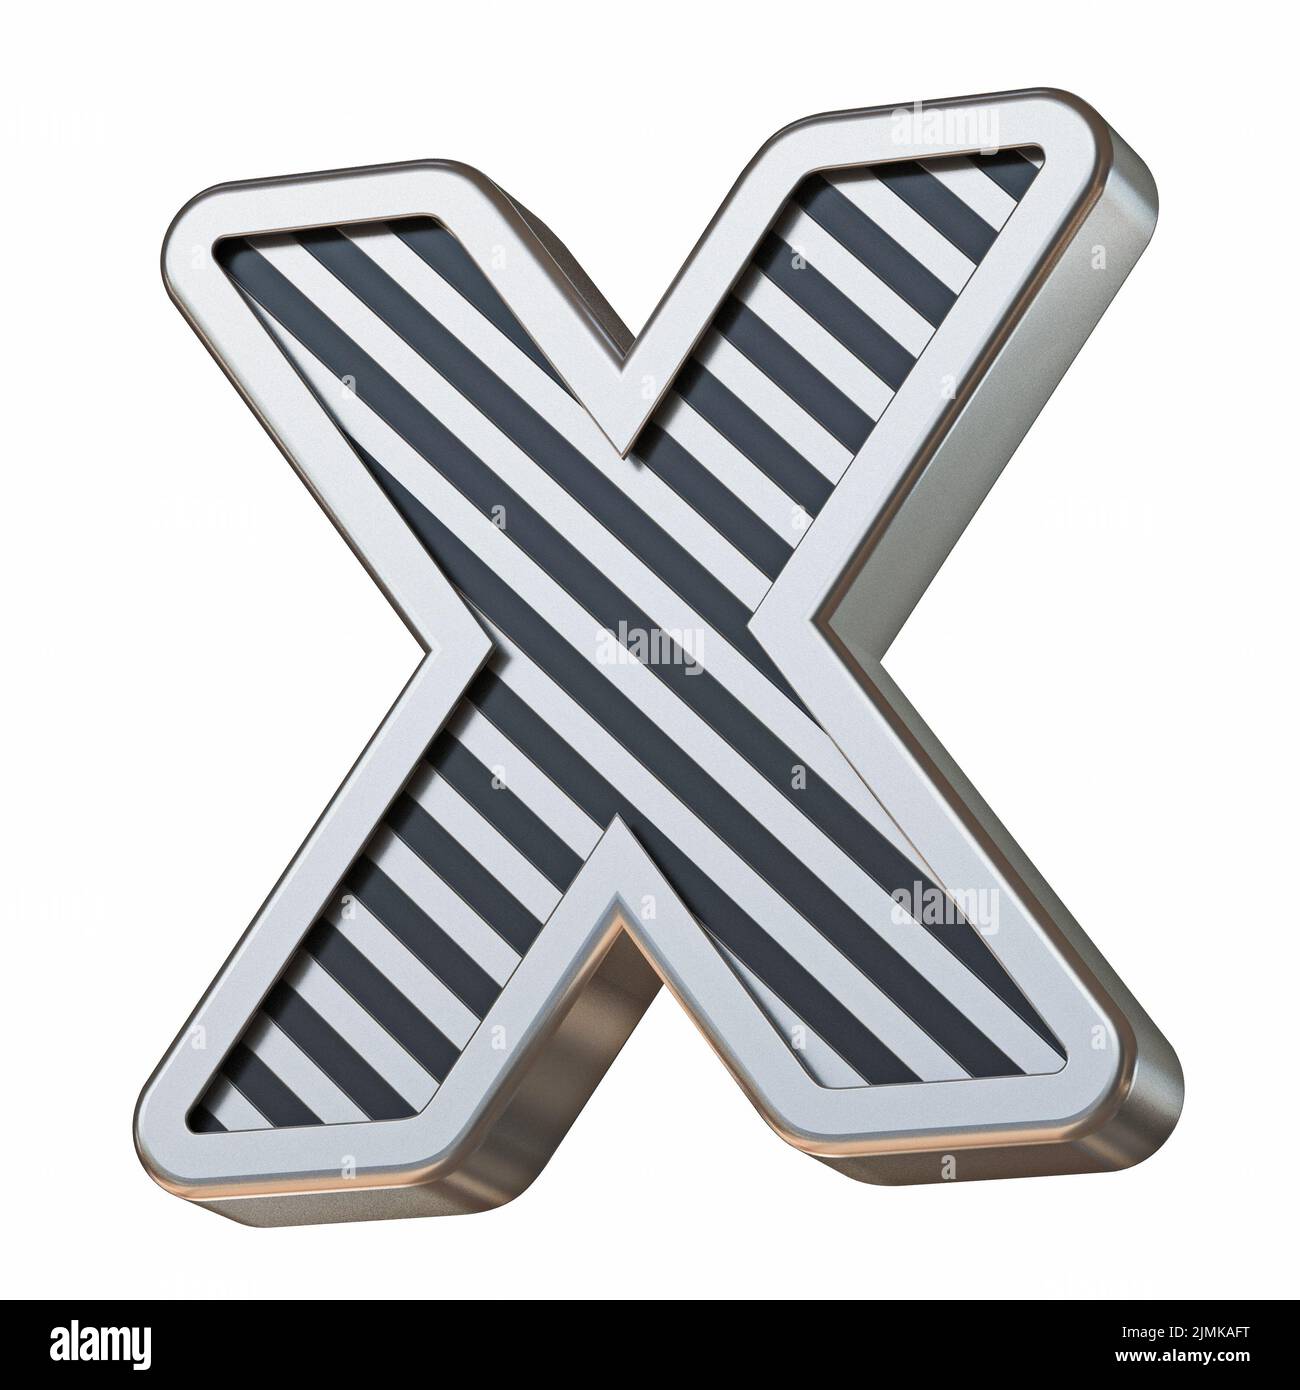 Stainless steel and black stripes font Letter X 3D Stock Photo